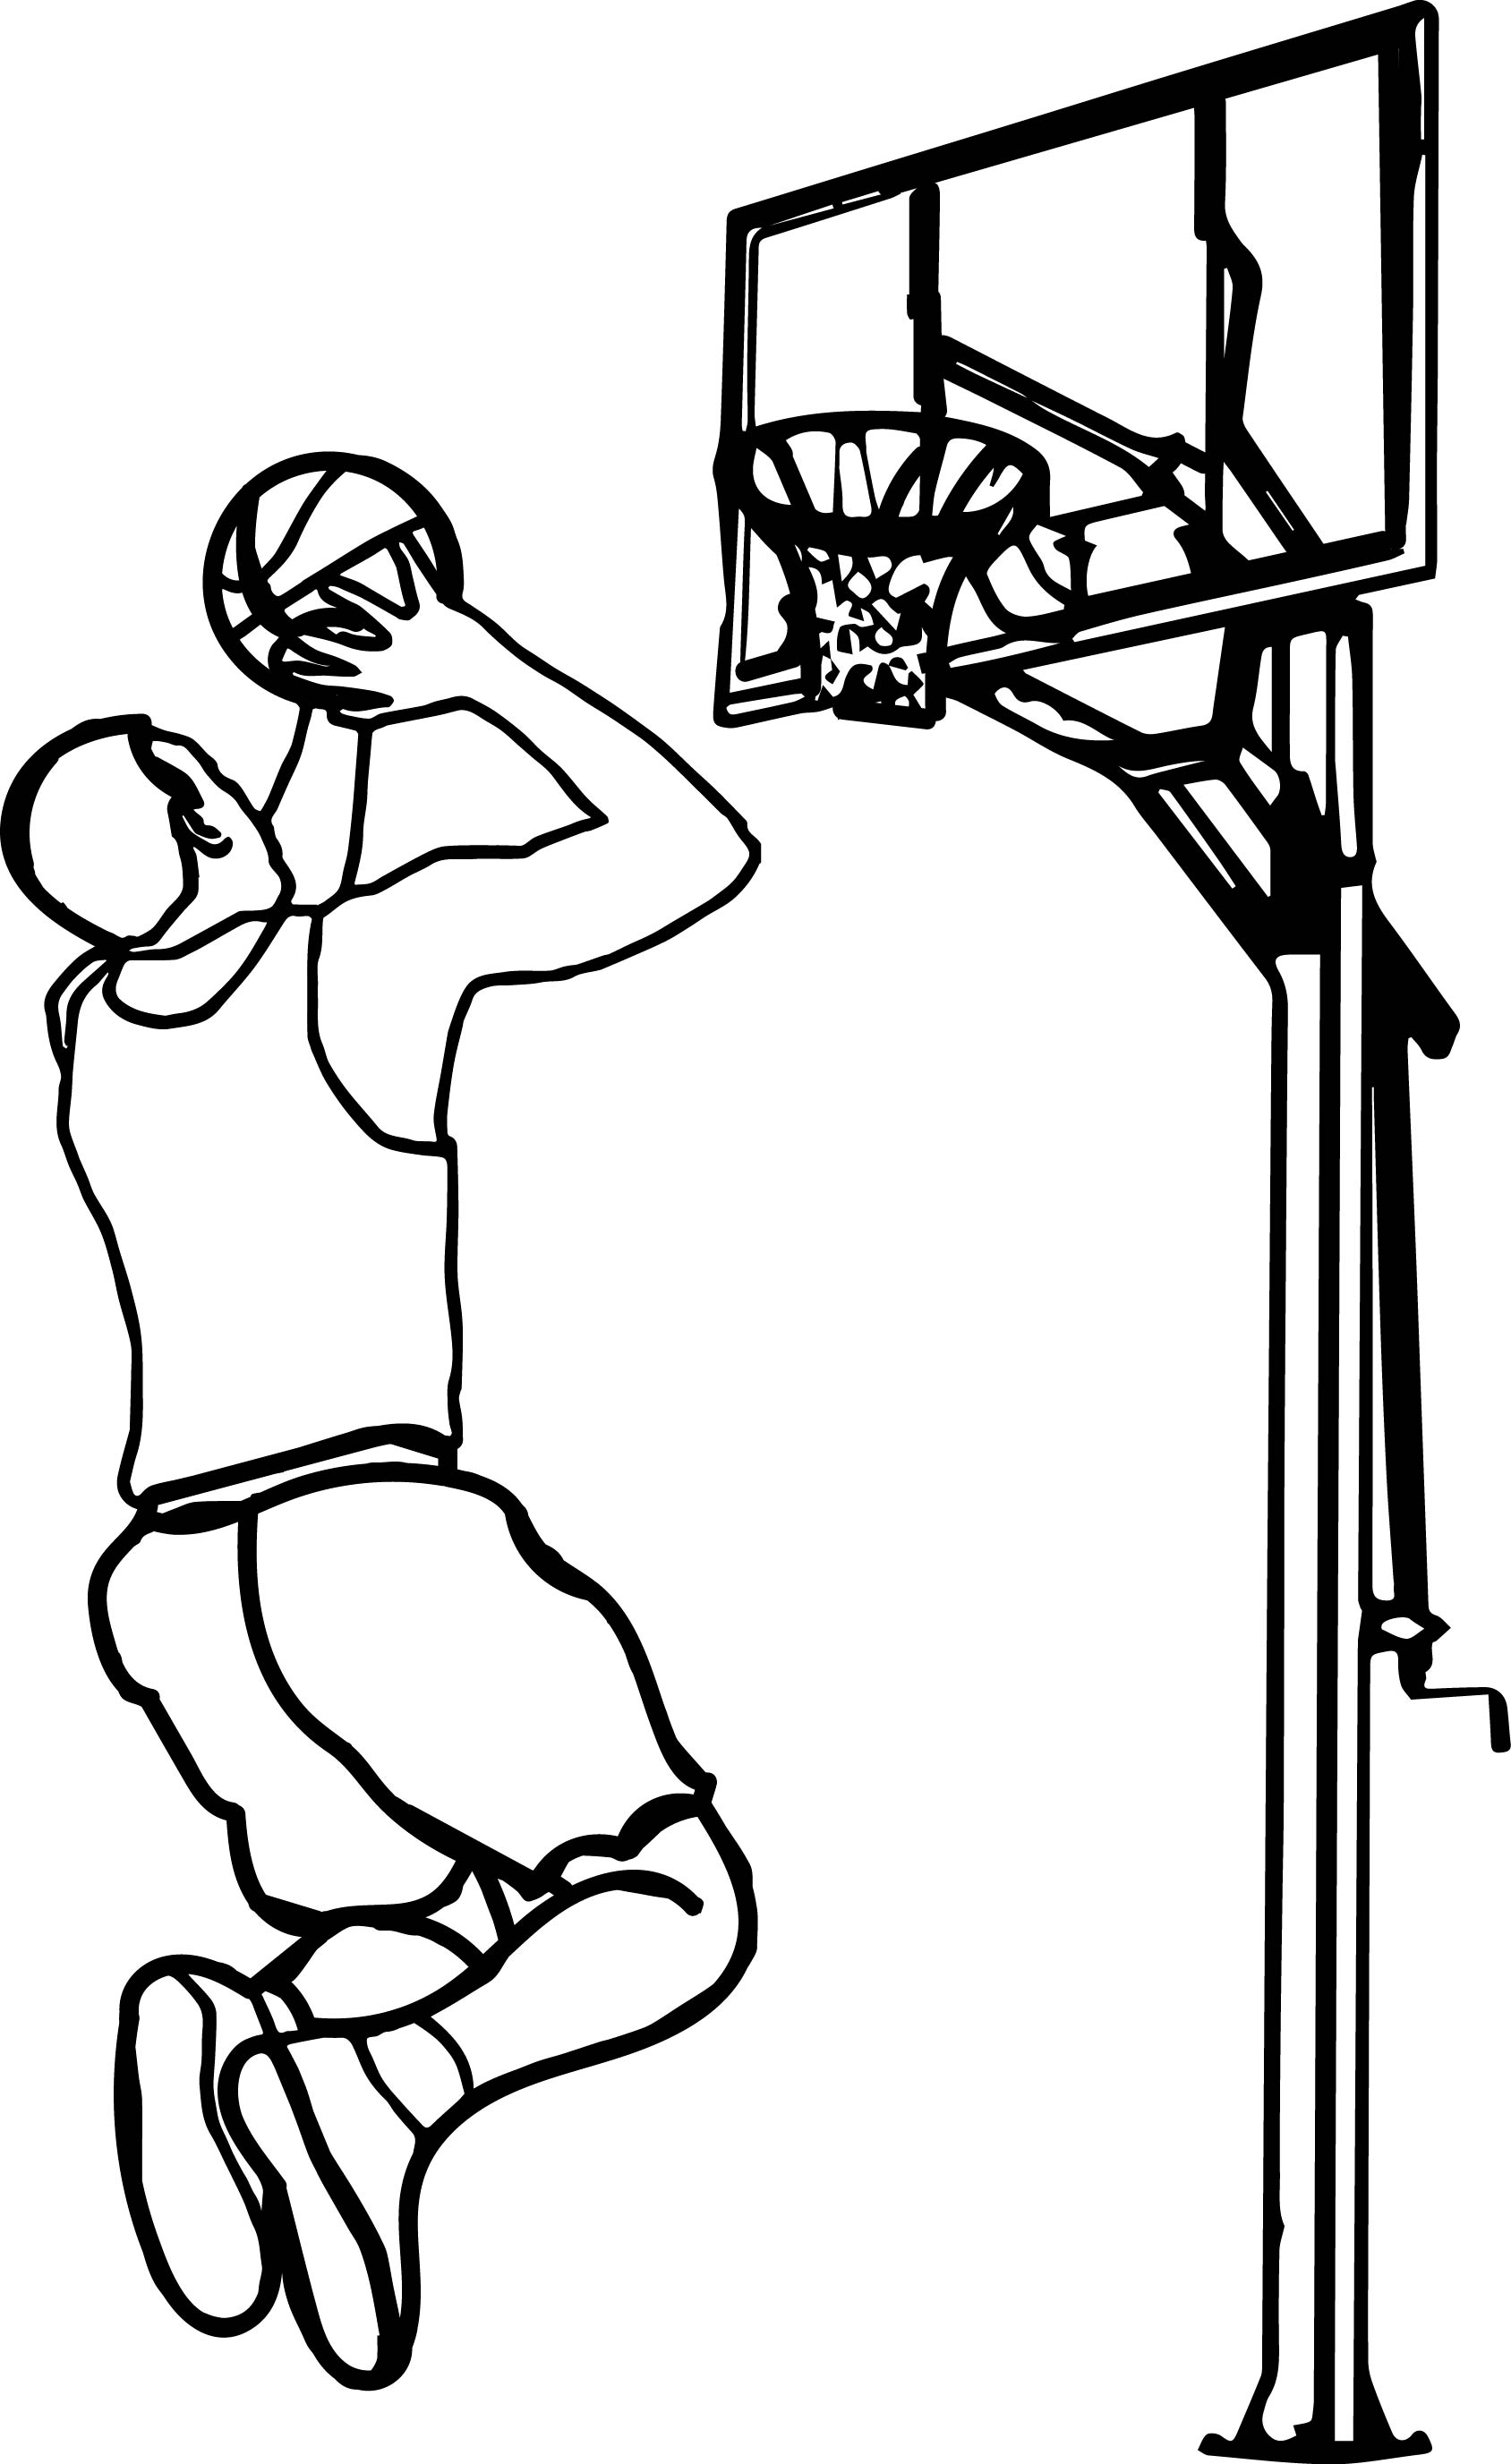 The Basketball Clipart For My Friend Thatrsquos You Playing.